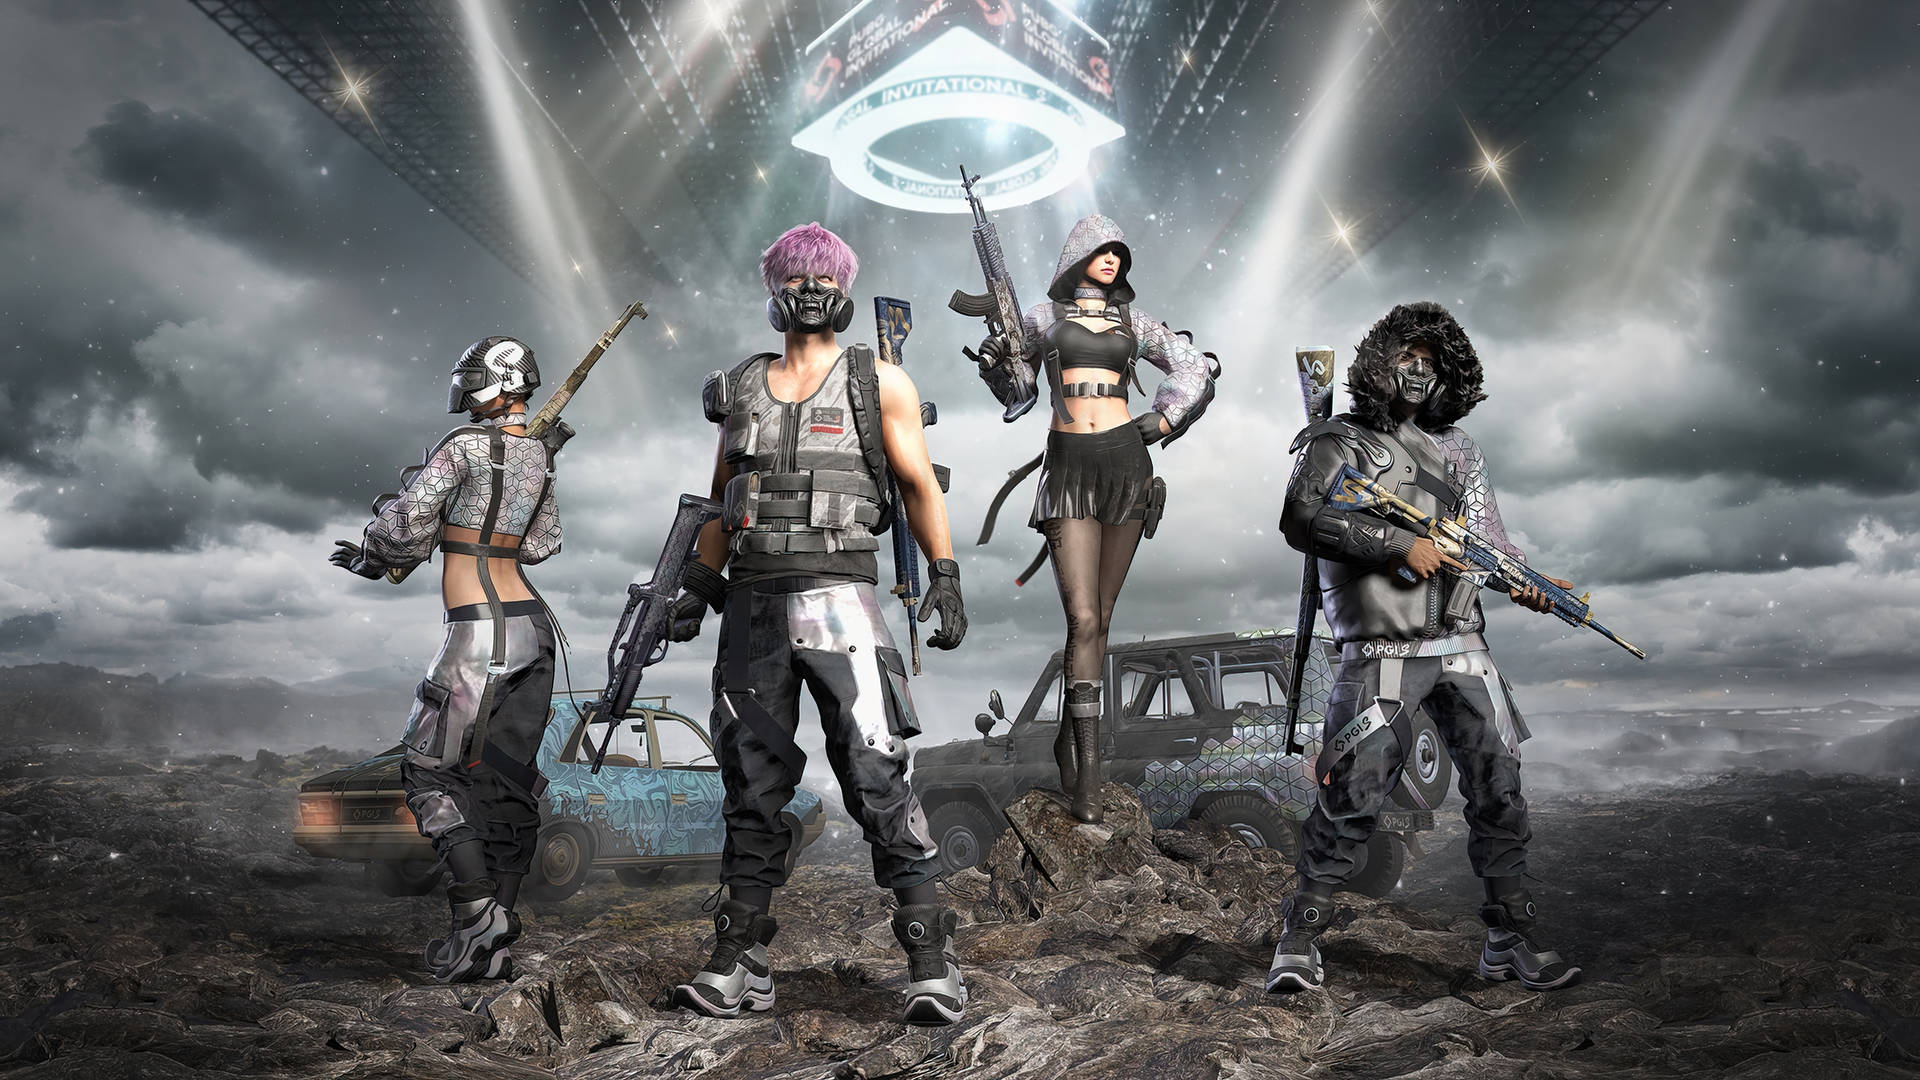 Top 999+ Pubg Squad Wallpapers Full HD, 4K✅Free to Use